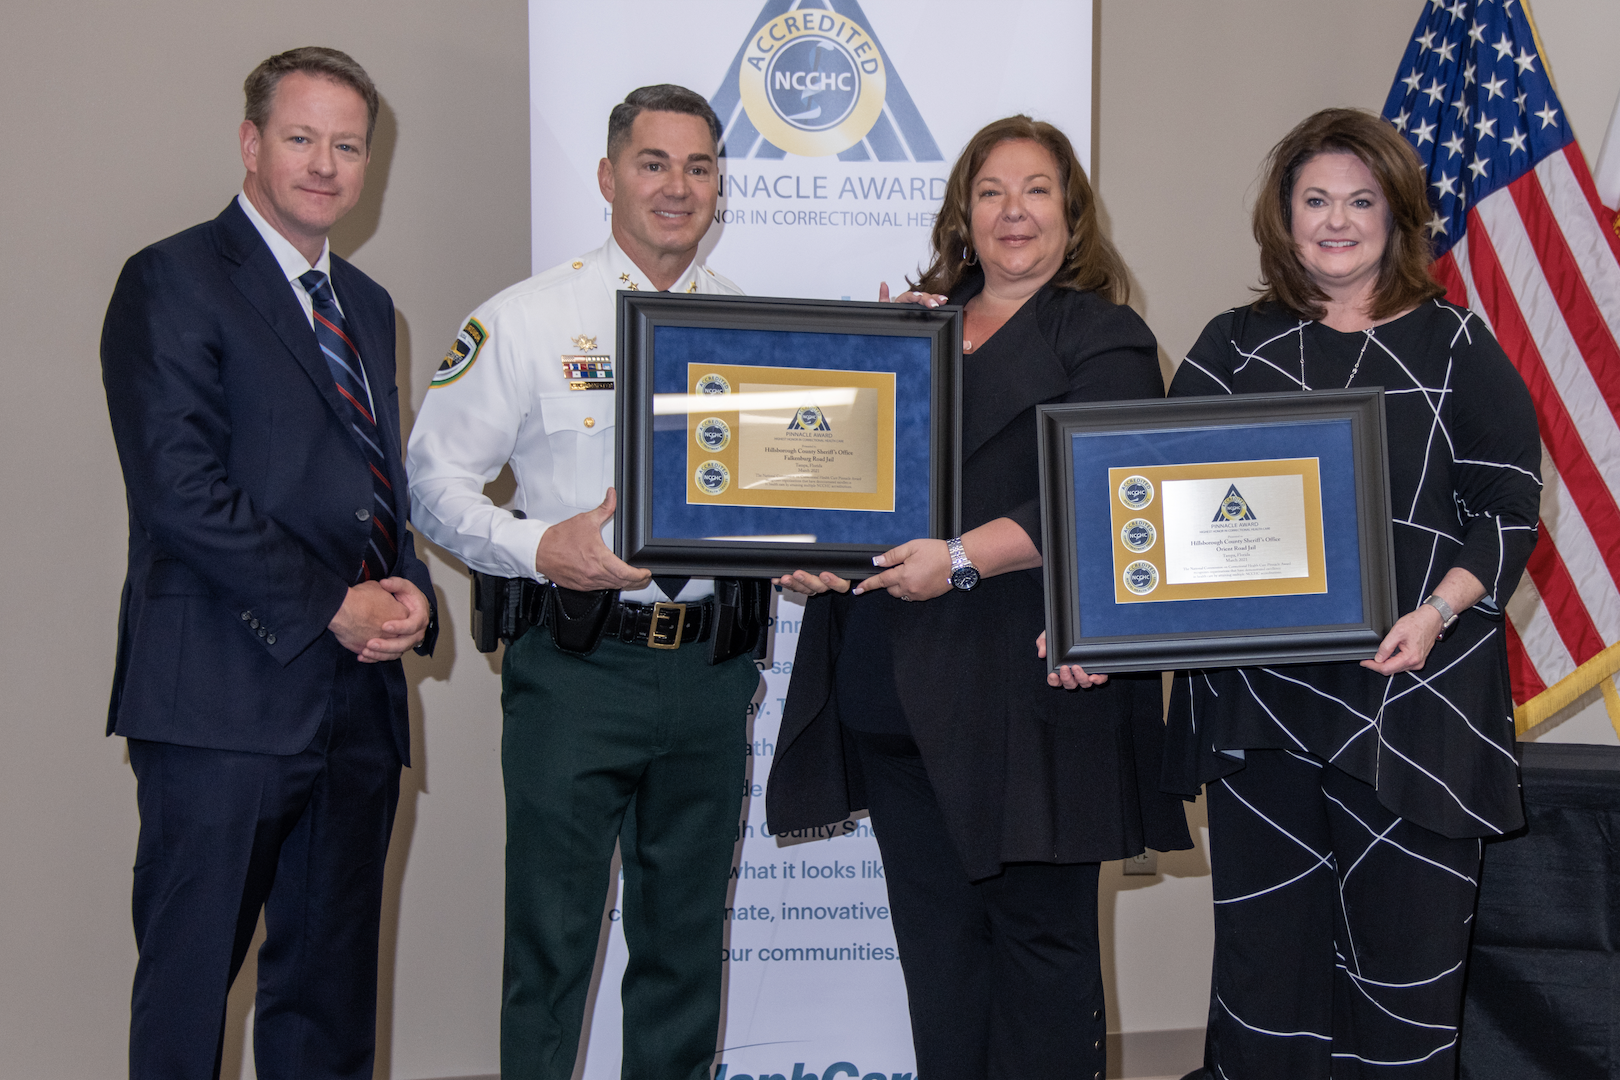 Hillsborough County Sheriff’s Office Awarded First in the Nation NCCHC Pinnacle Award